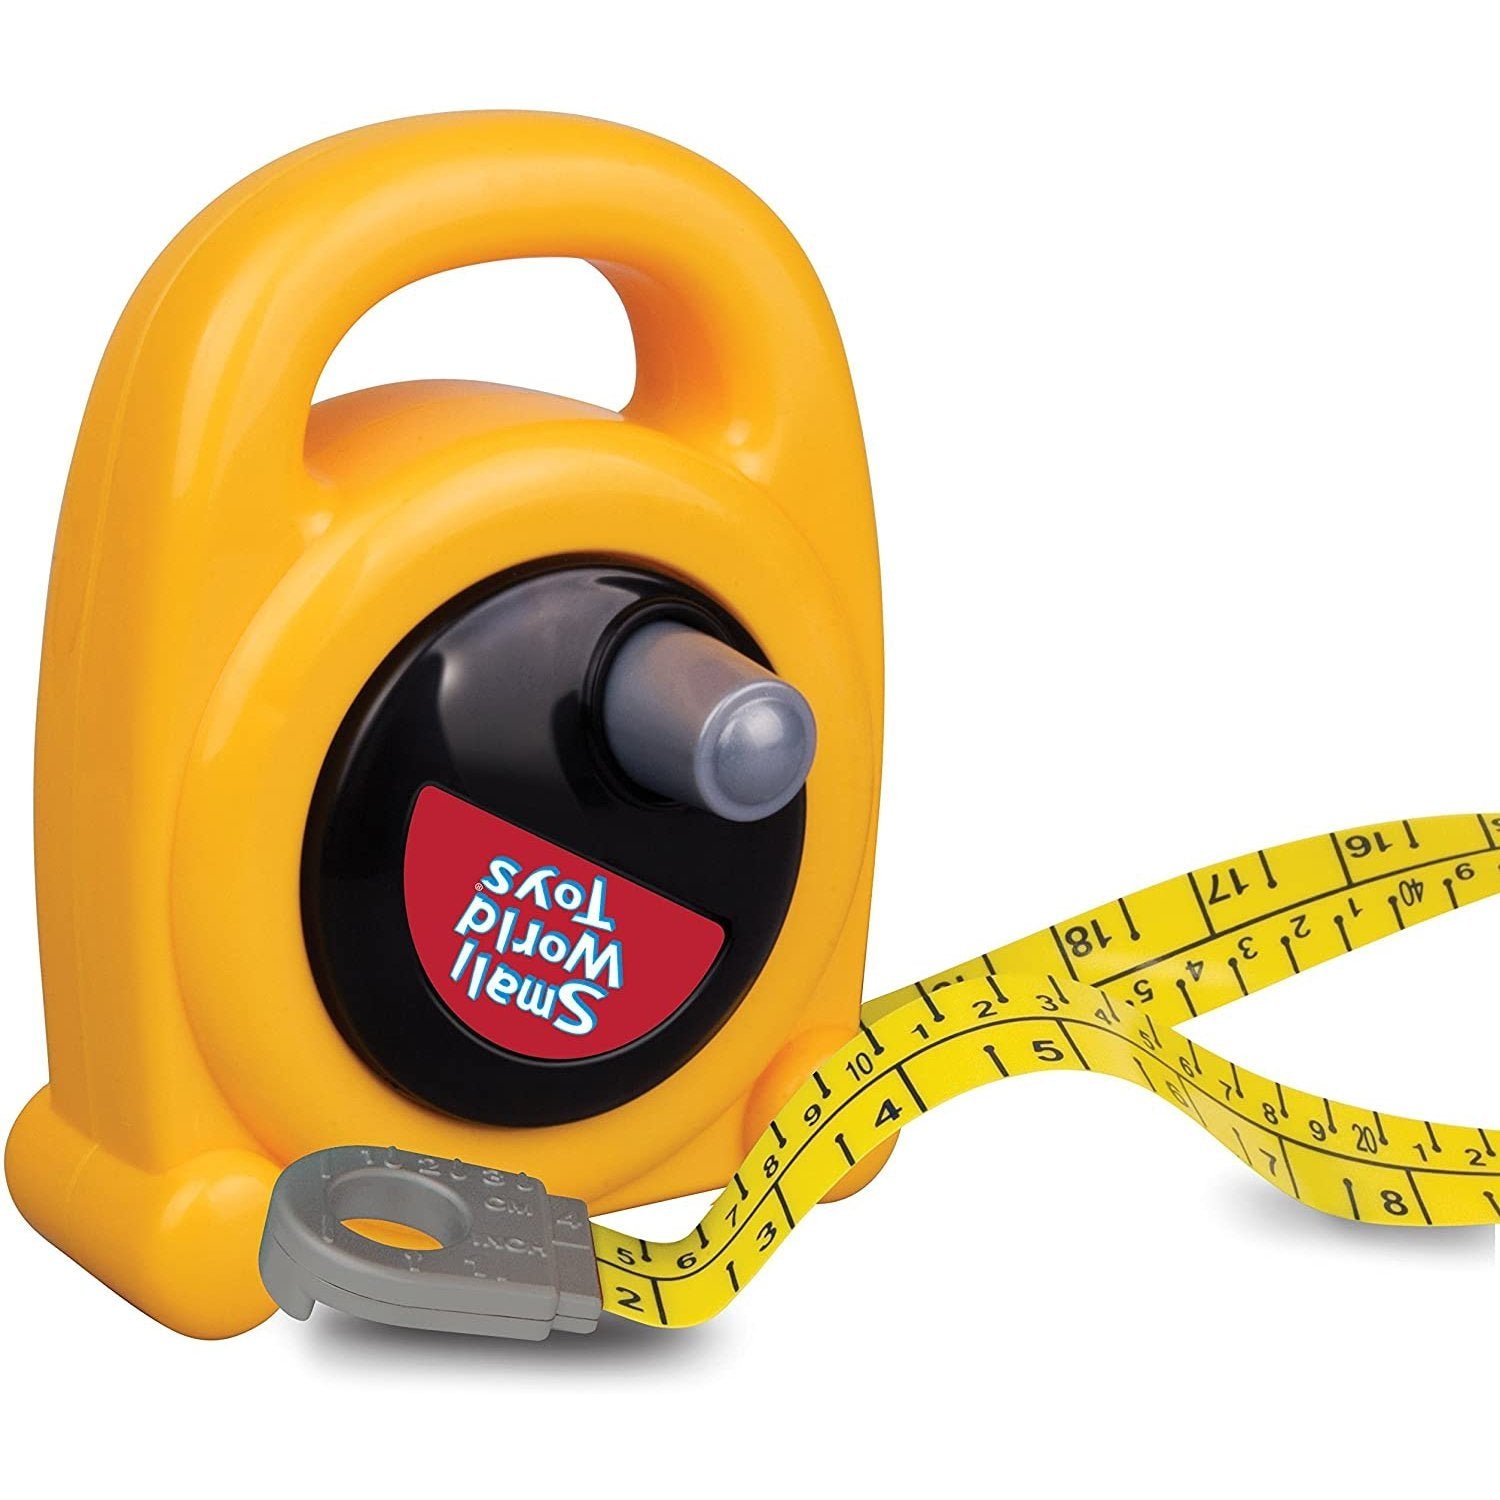 Small World Toys Toy Tape Measure-The Big Tape